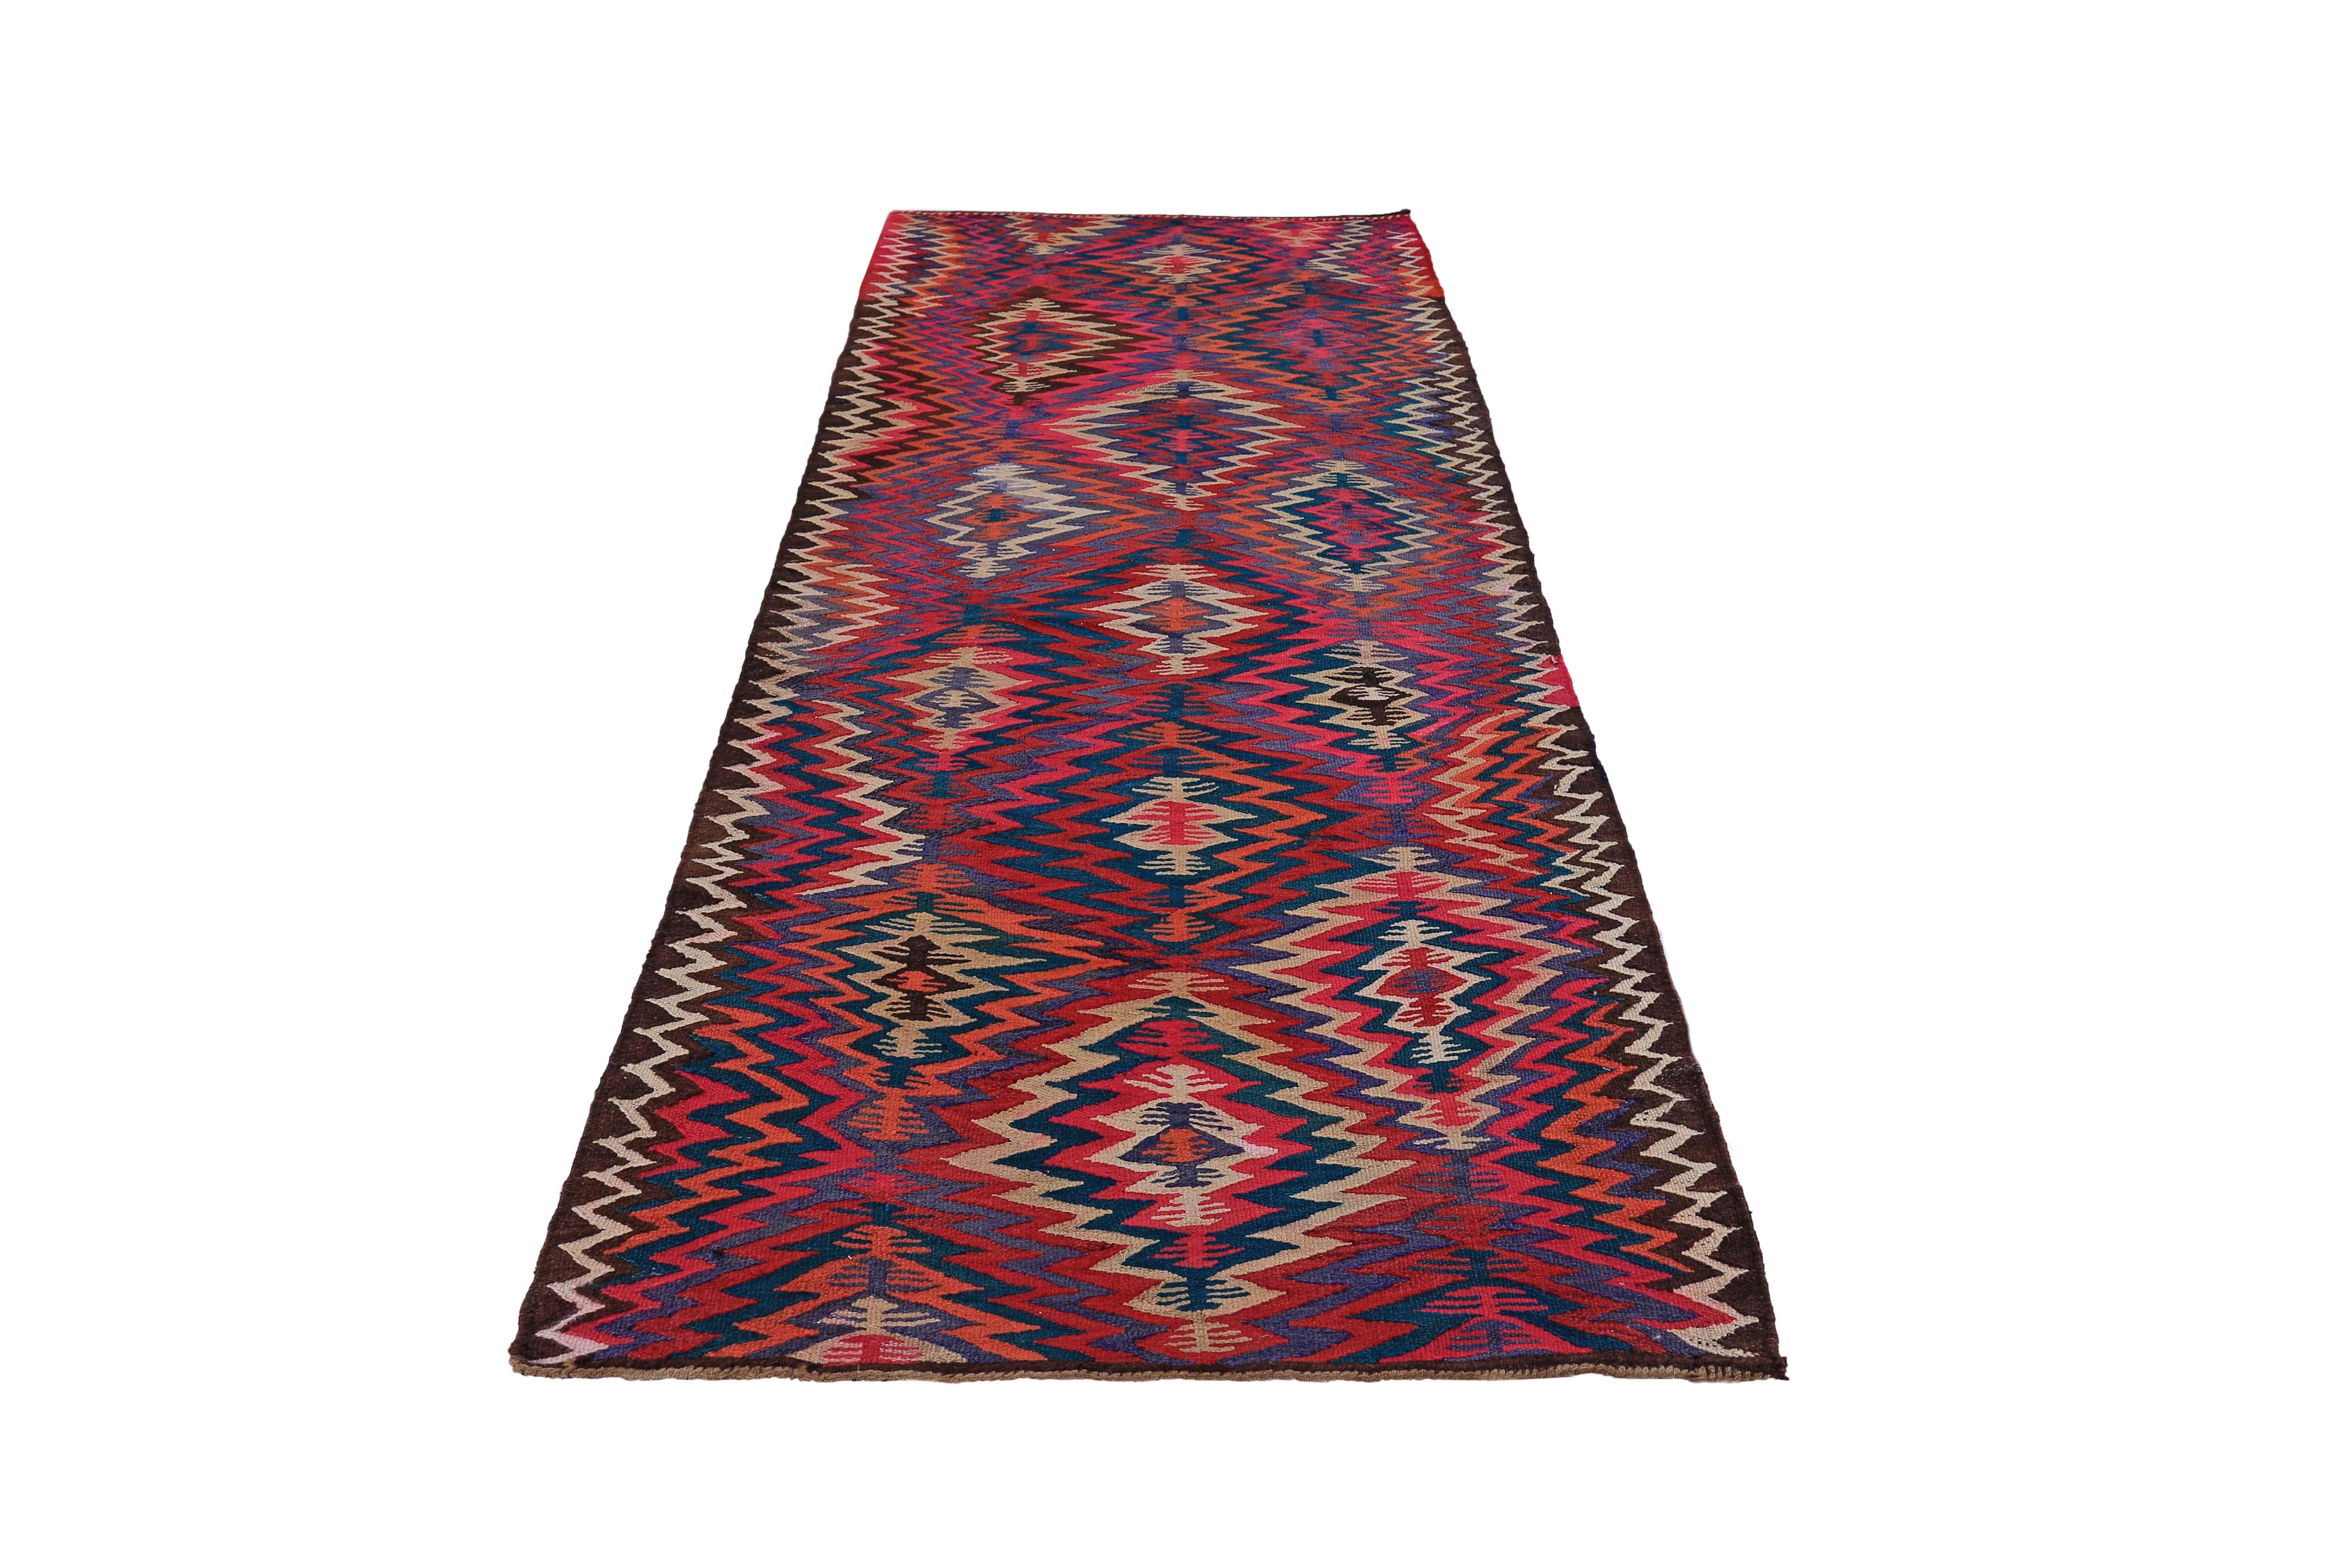 Turkish runner rug handwoven from the finest sheep’s wool and colored with all-natural vegetable dyes that are safe for humans and pets. It’s a traditional Kilim flat-weave design featuring pink, red, and purple tribal details. It’s a stunning piece